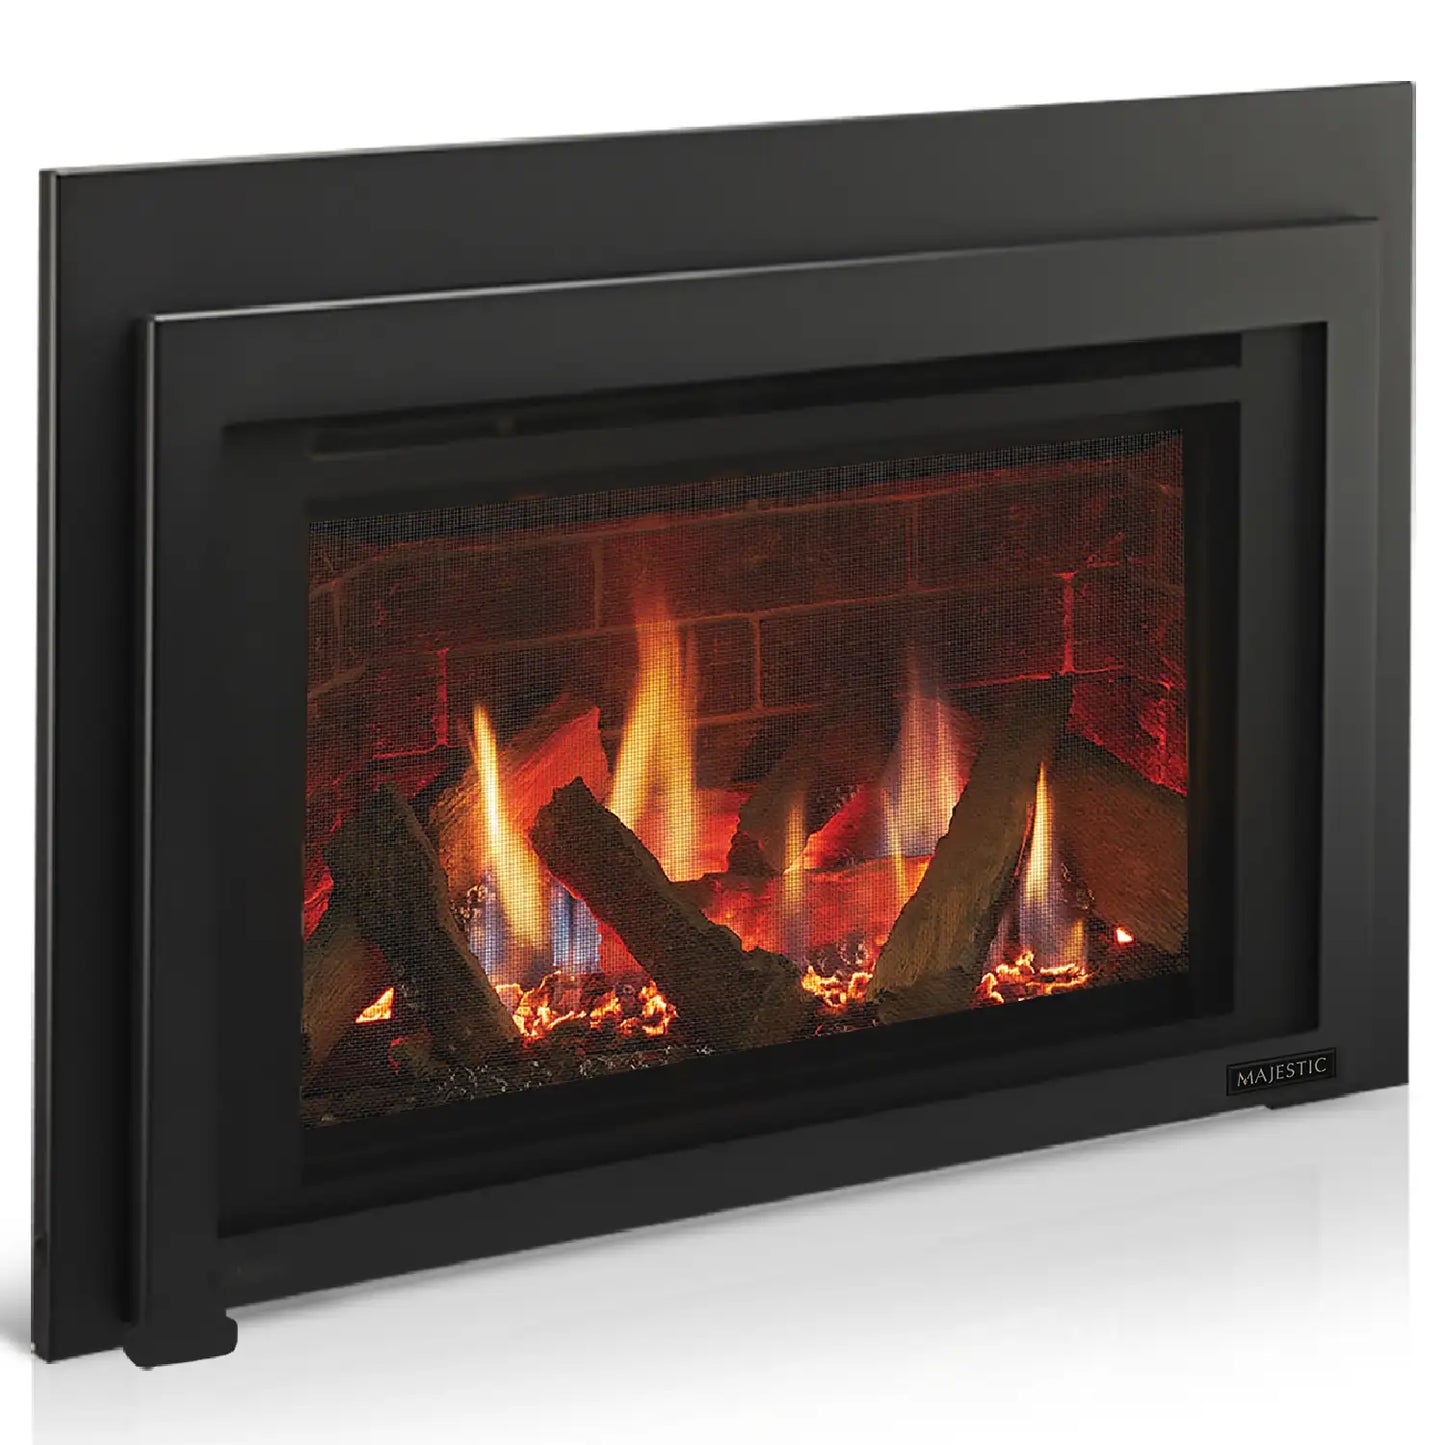 Majestic Ruby 25" Direct Vent Gas Fireplace Insert - Includes Touchscreen Remote